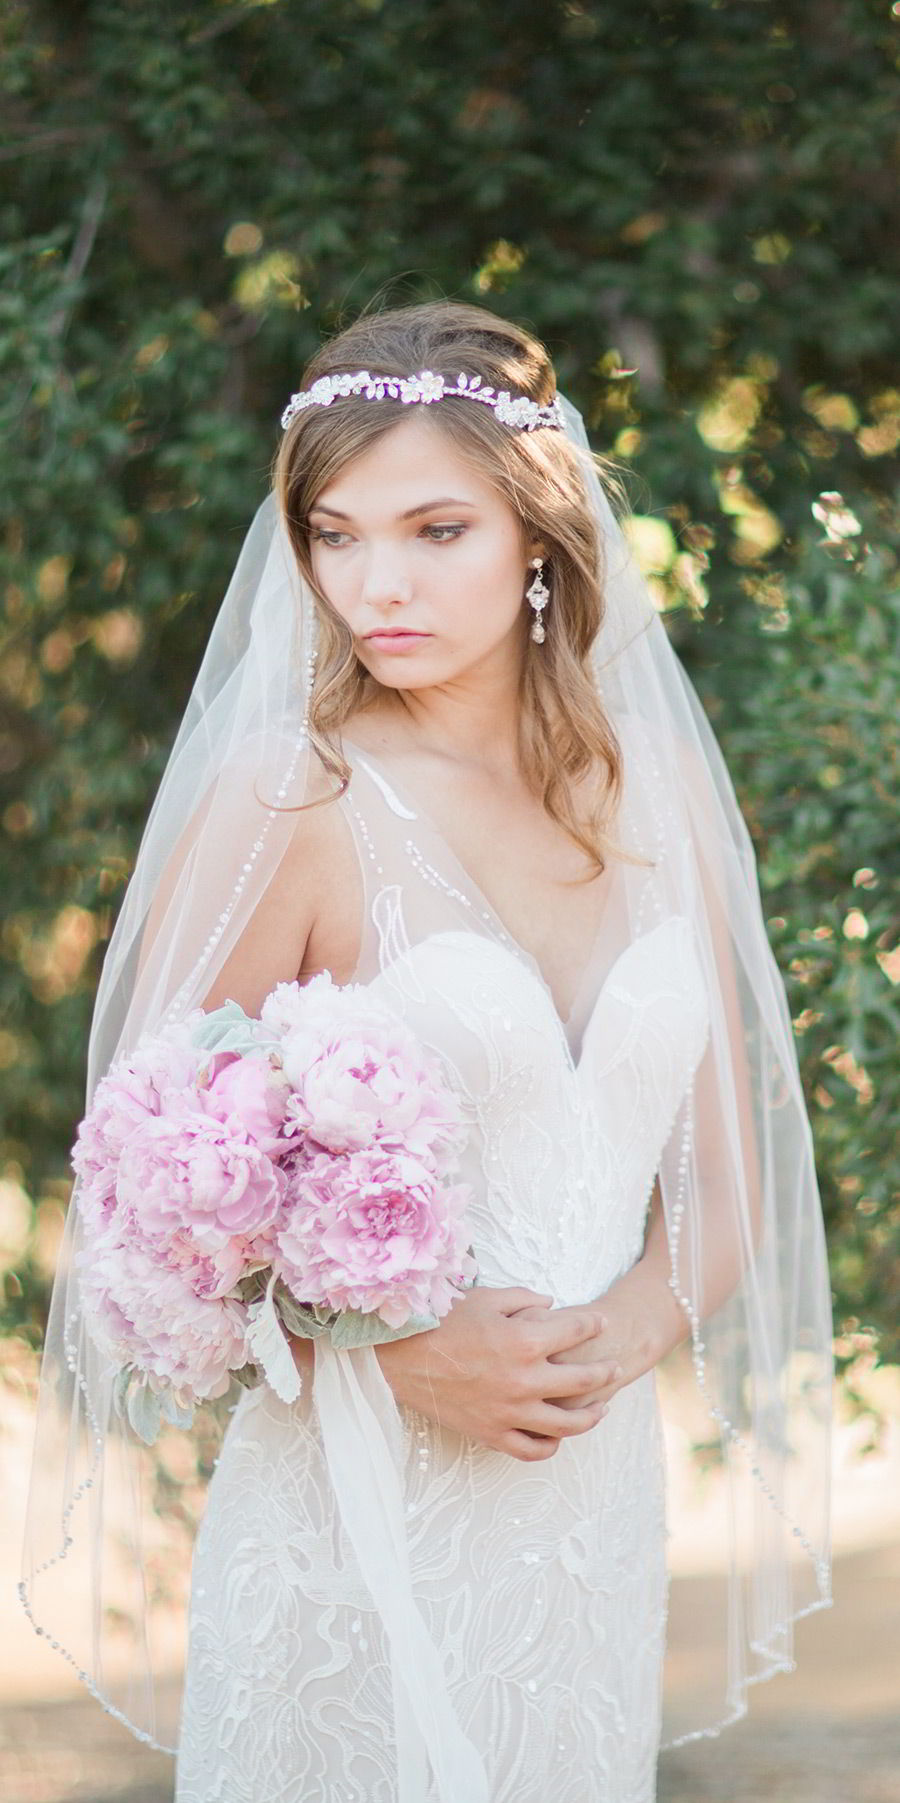 Wedding veils - what's hot in headpieces - Ivory Tribe